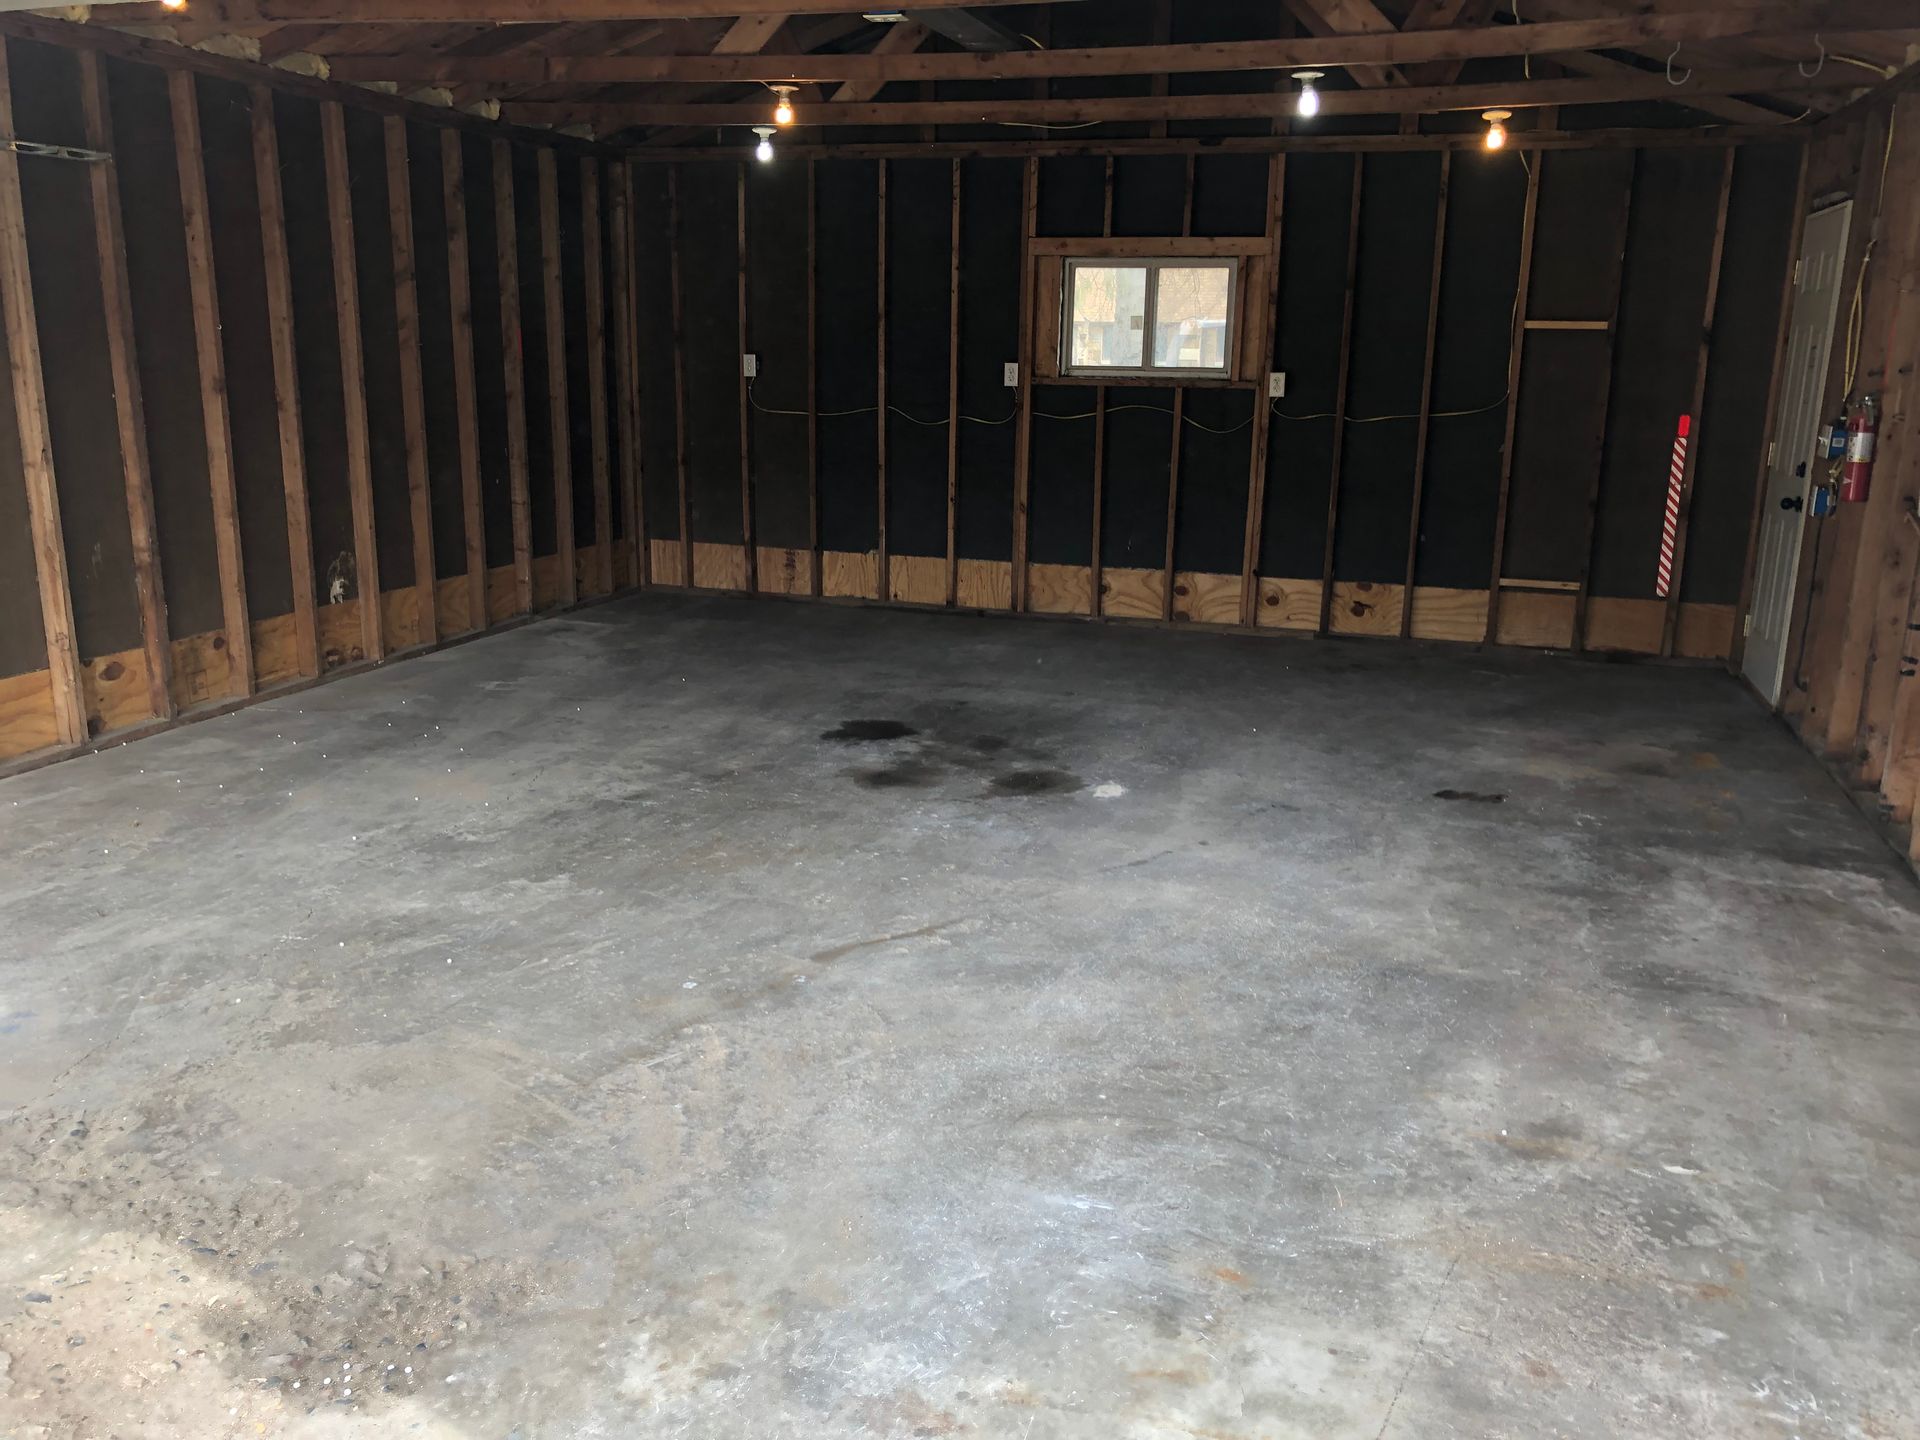 An empty garage with a window and a concrete floor.